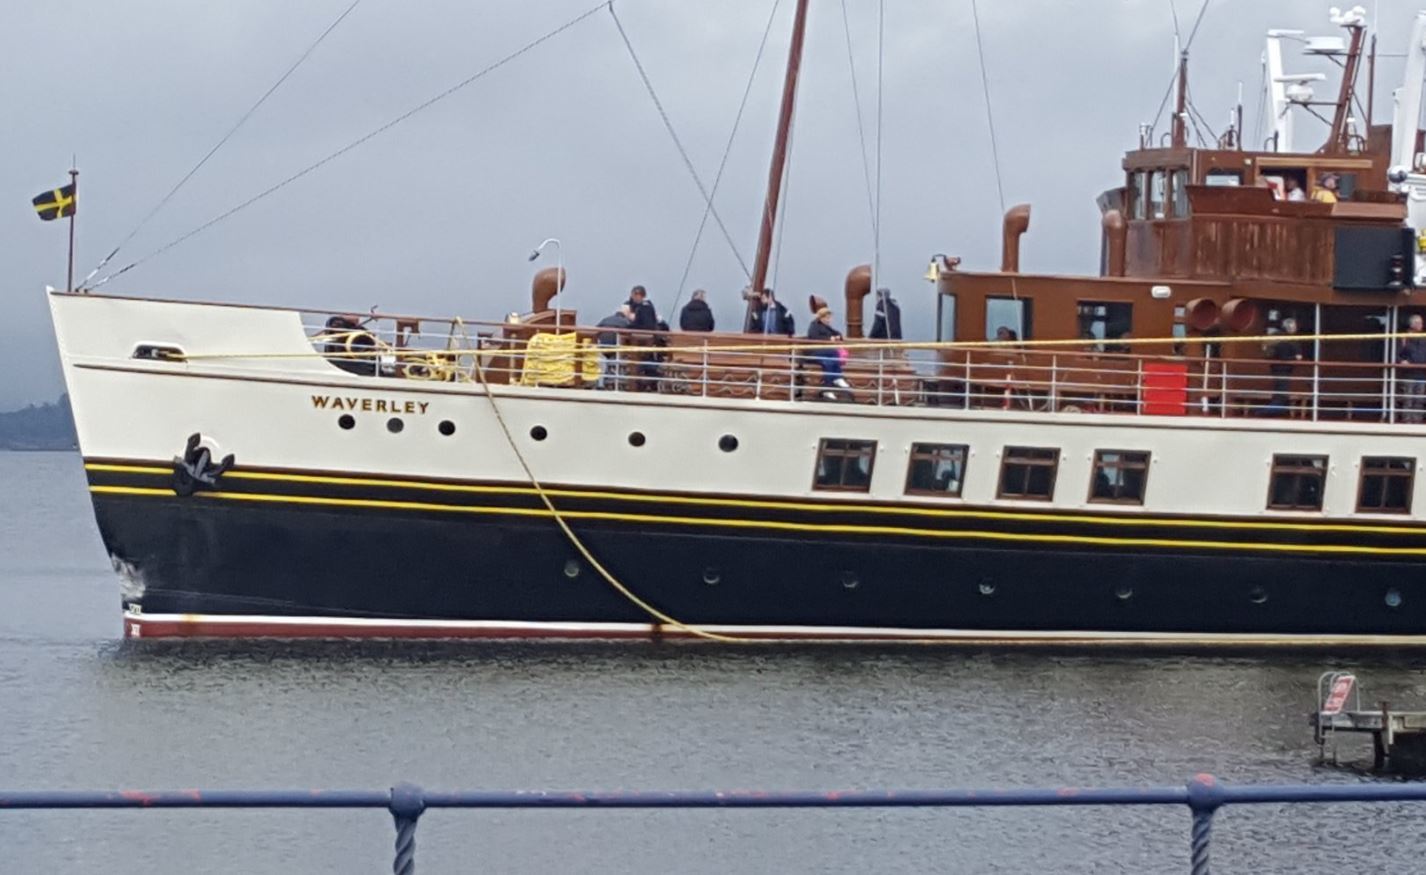 The paddle steamer sustained minor damage in the incident (Peter Wallace / Twitter)